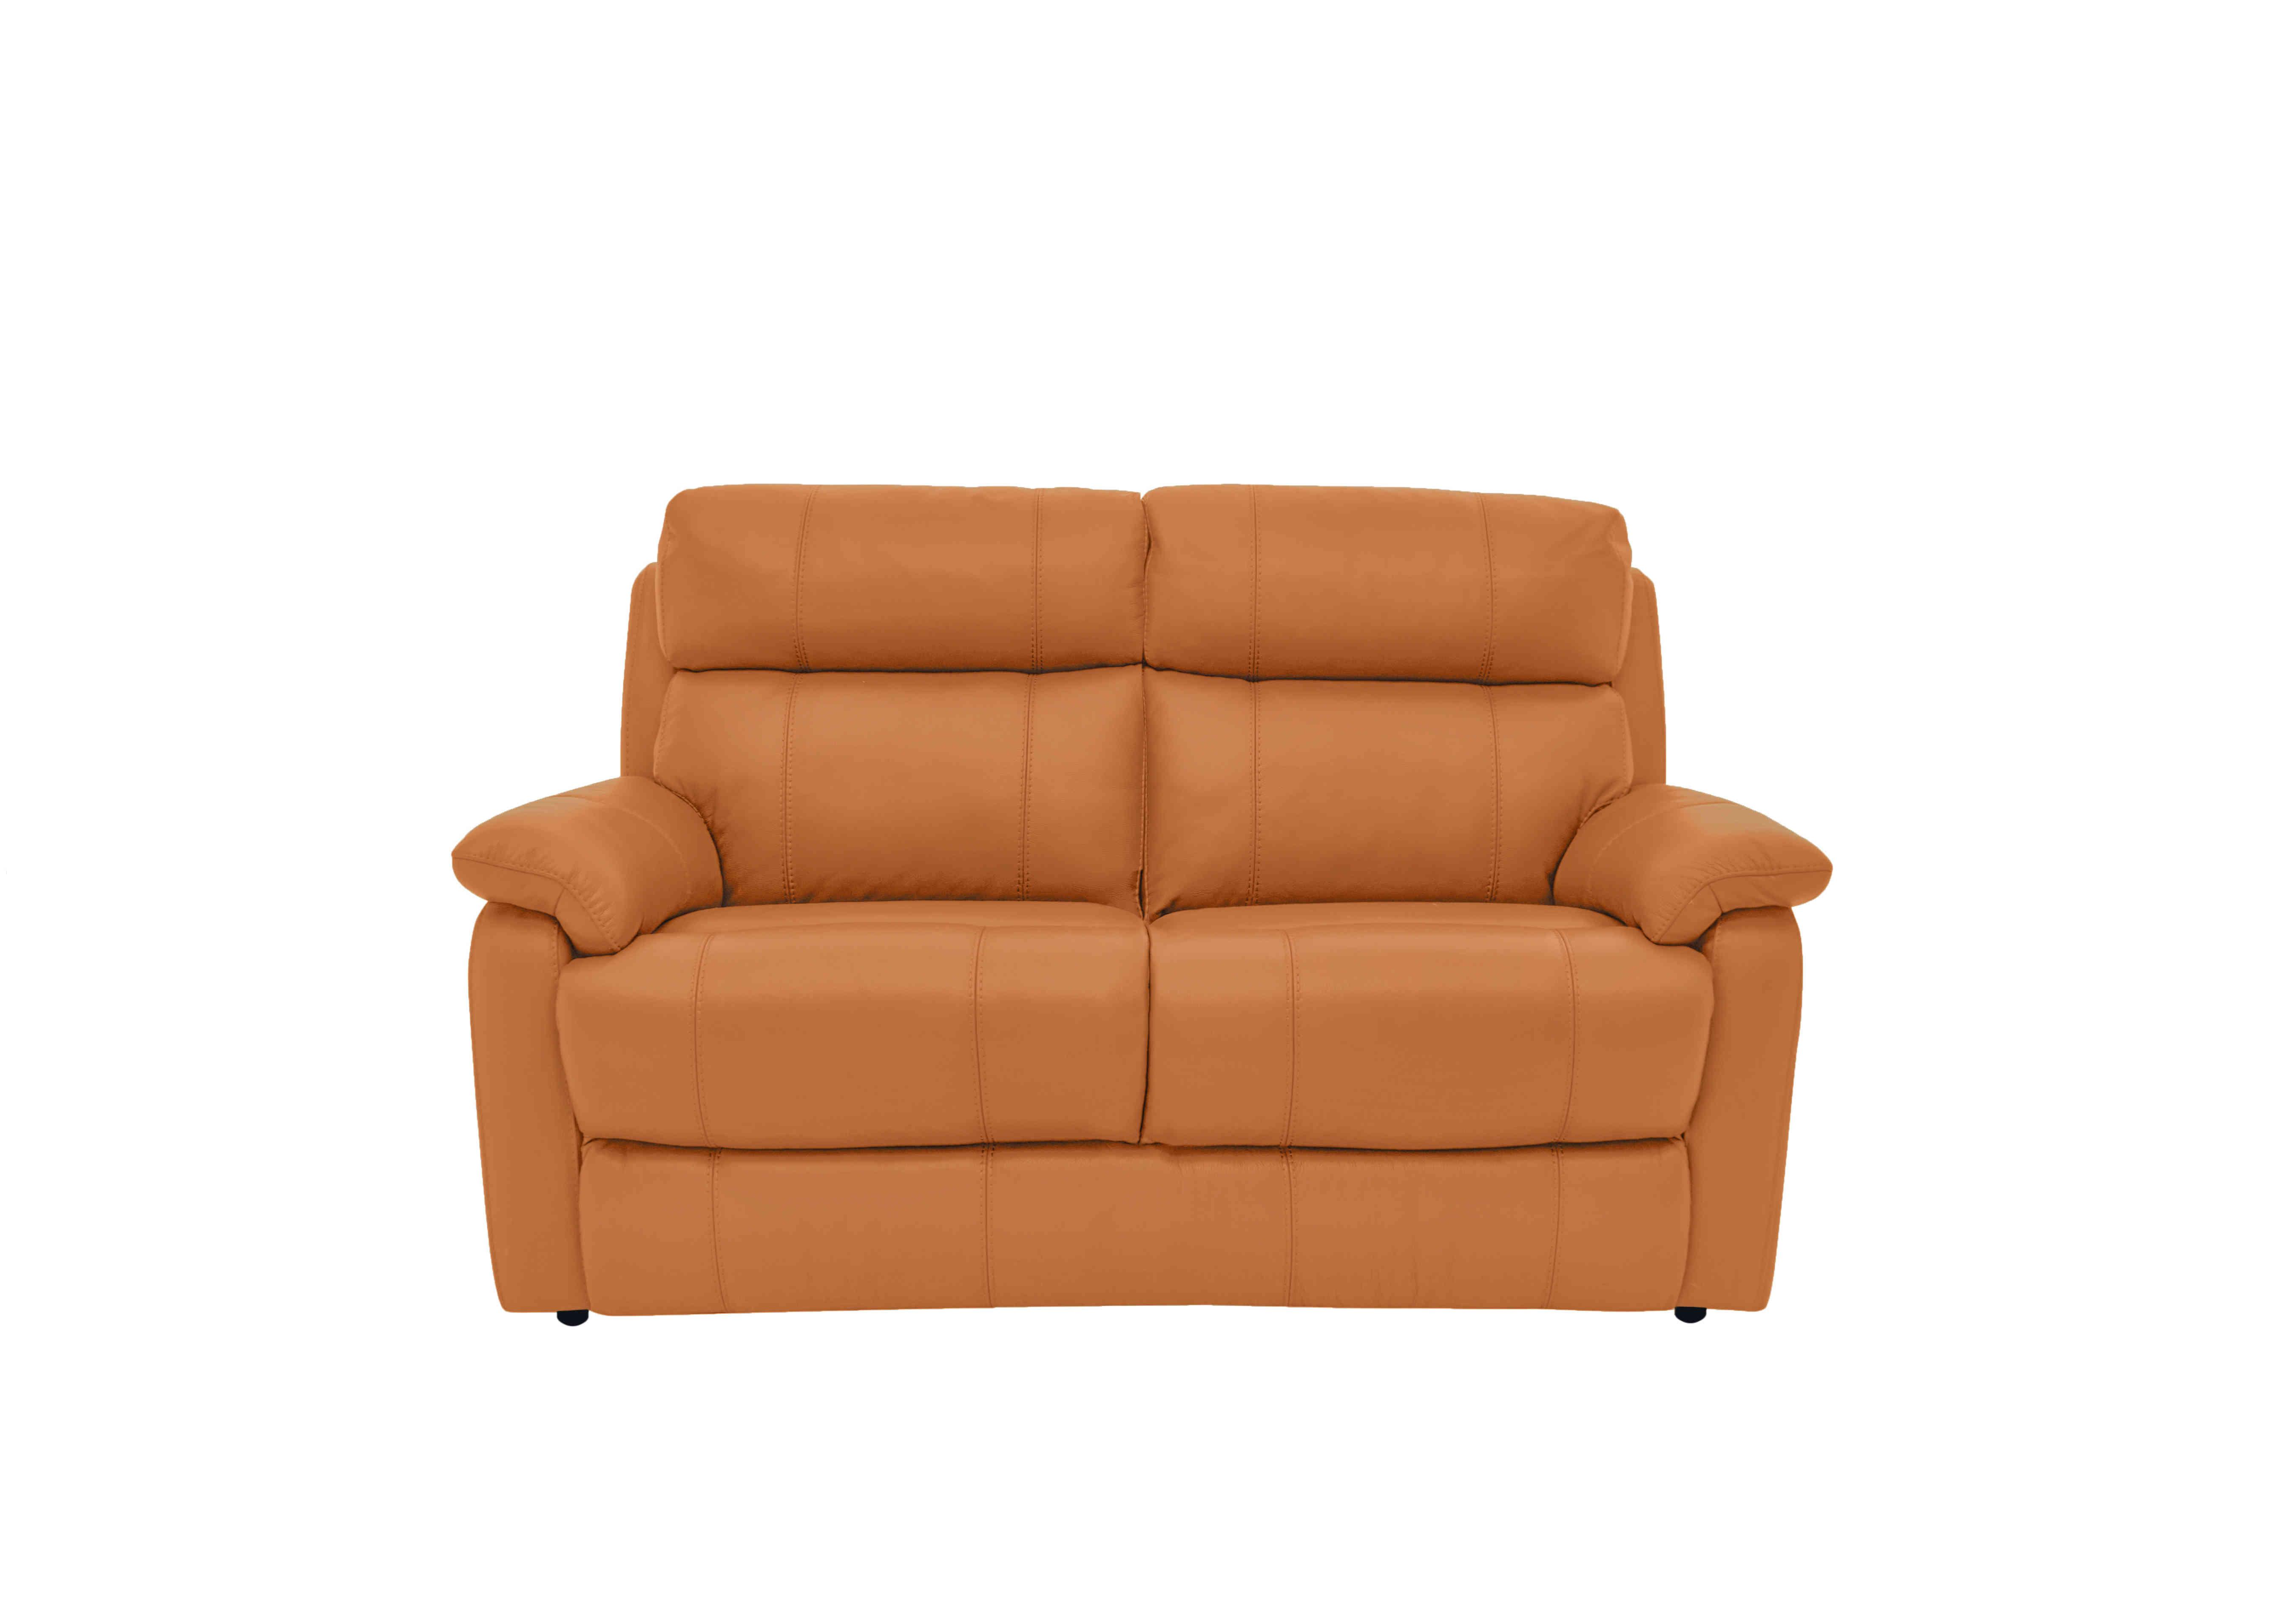 Relax Station Komodo 2 Seater Leather Sofa in Bv-335e Honey Yellow on Furniture Village